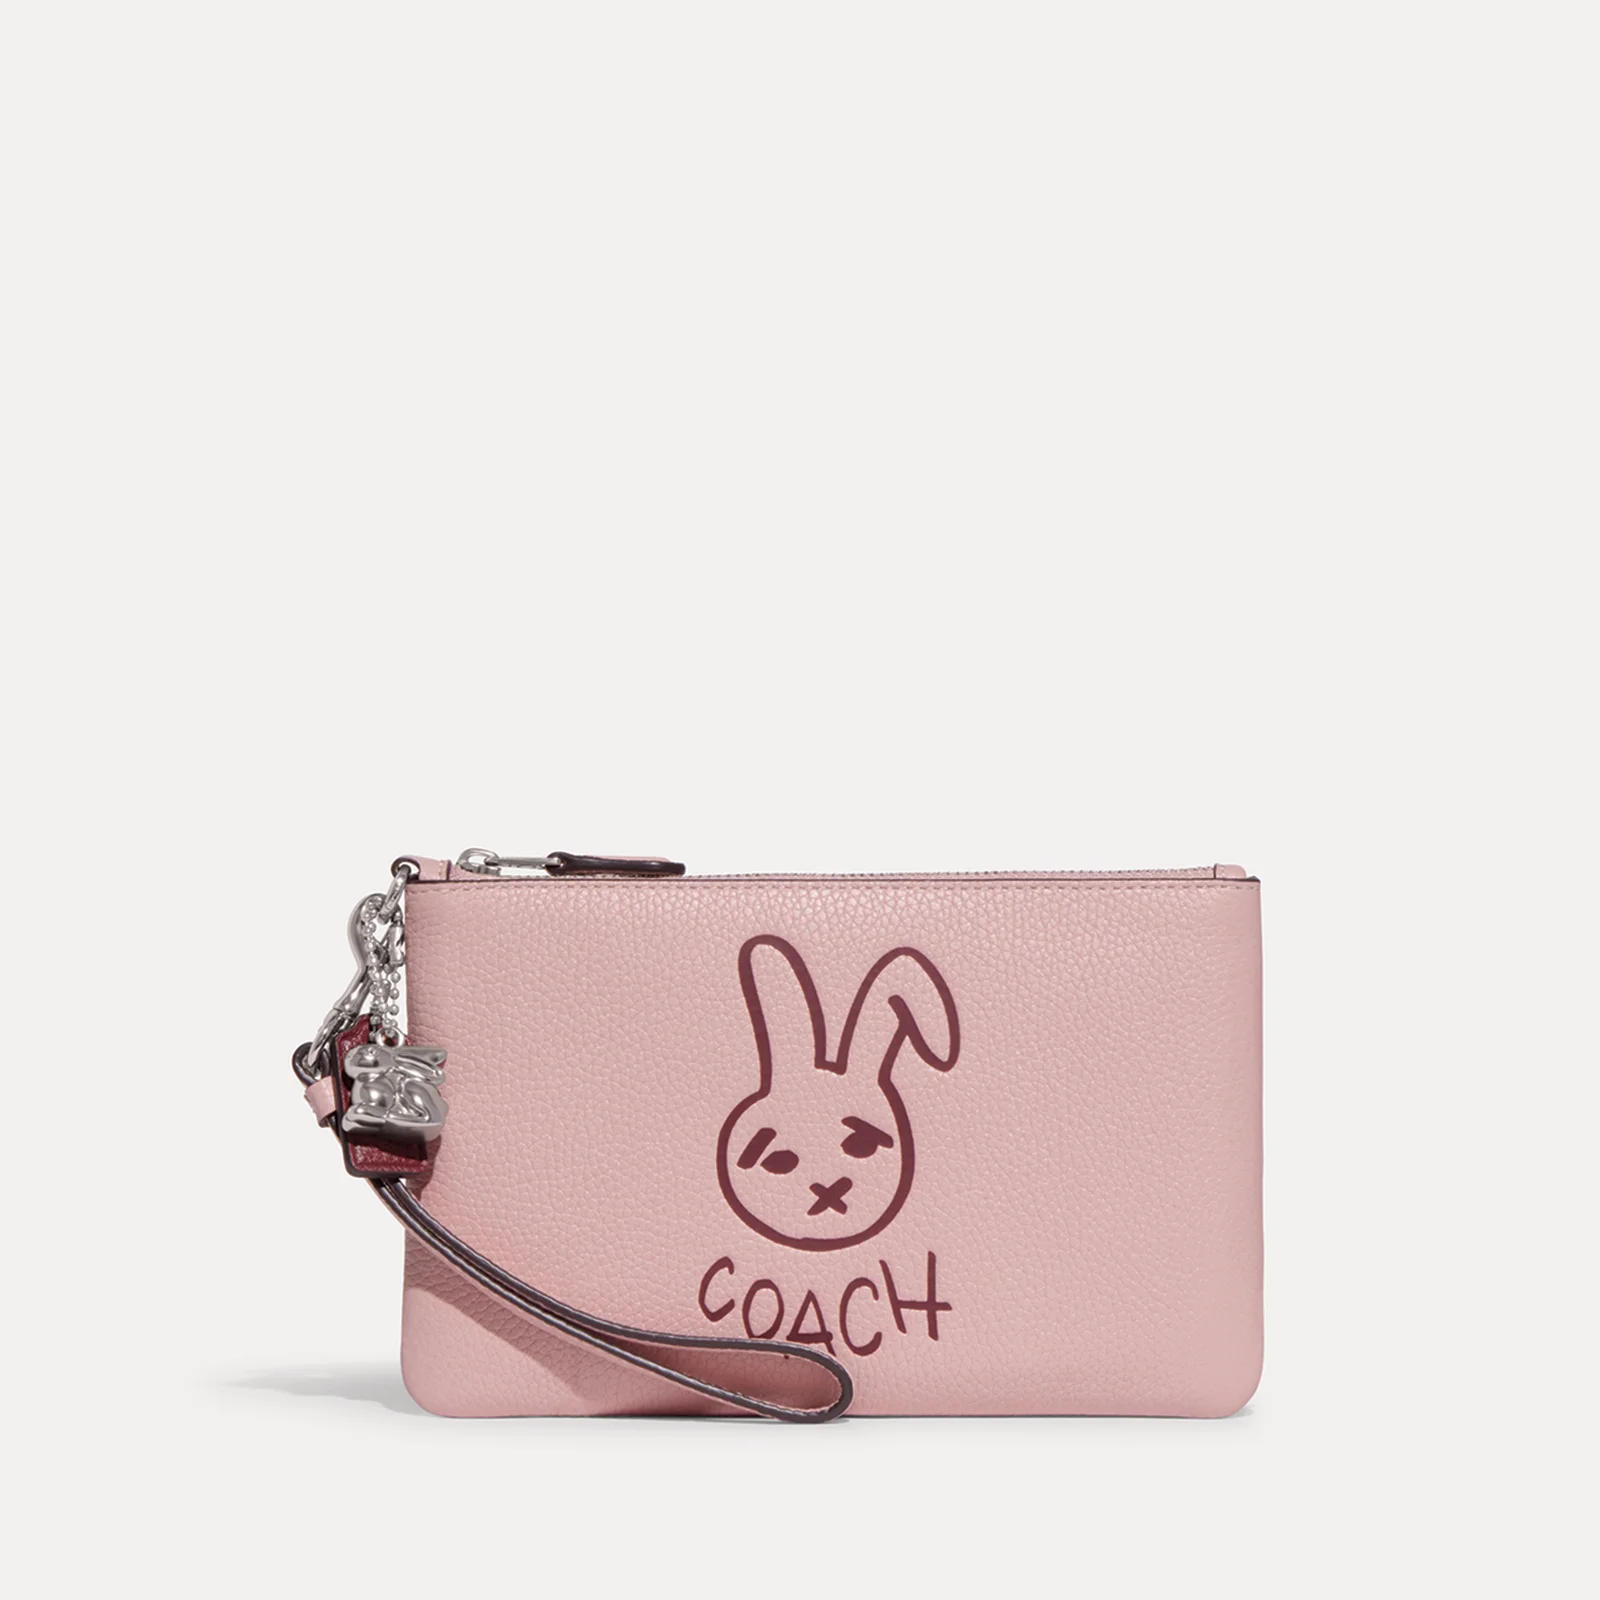 Coach Small Bunny Printed Leather Clutch Lh/Powder Pink Multi Image 1